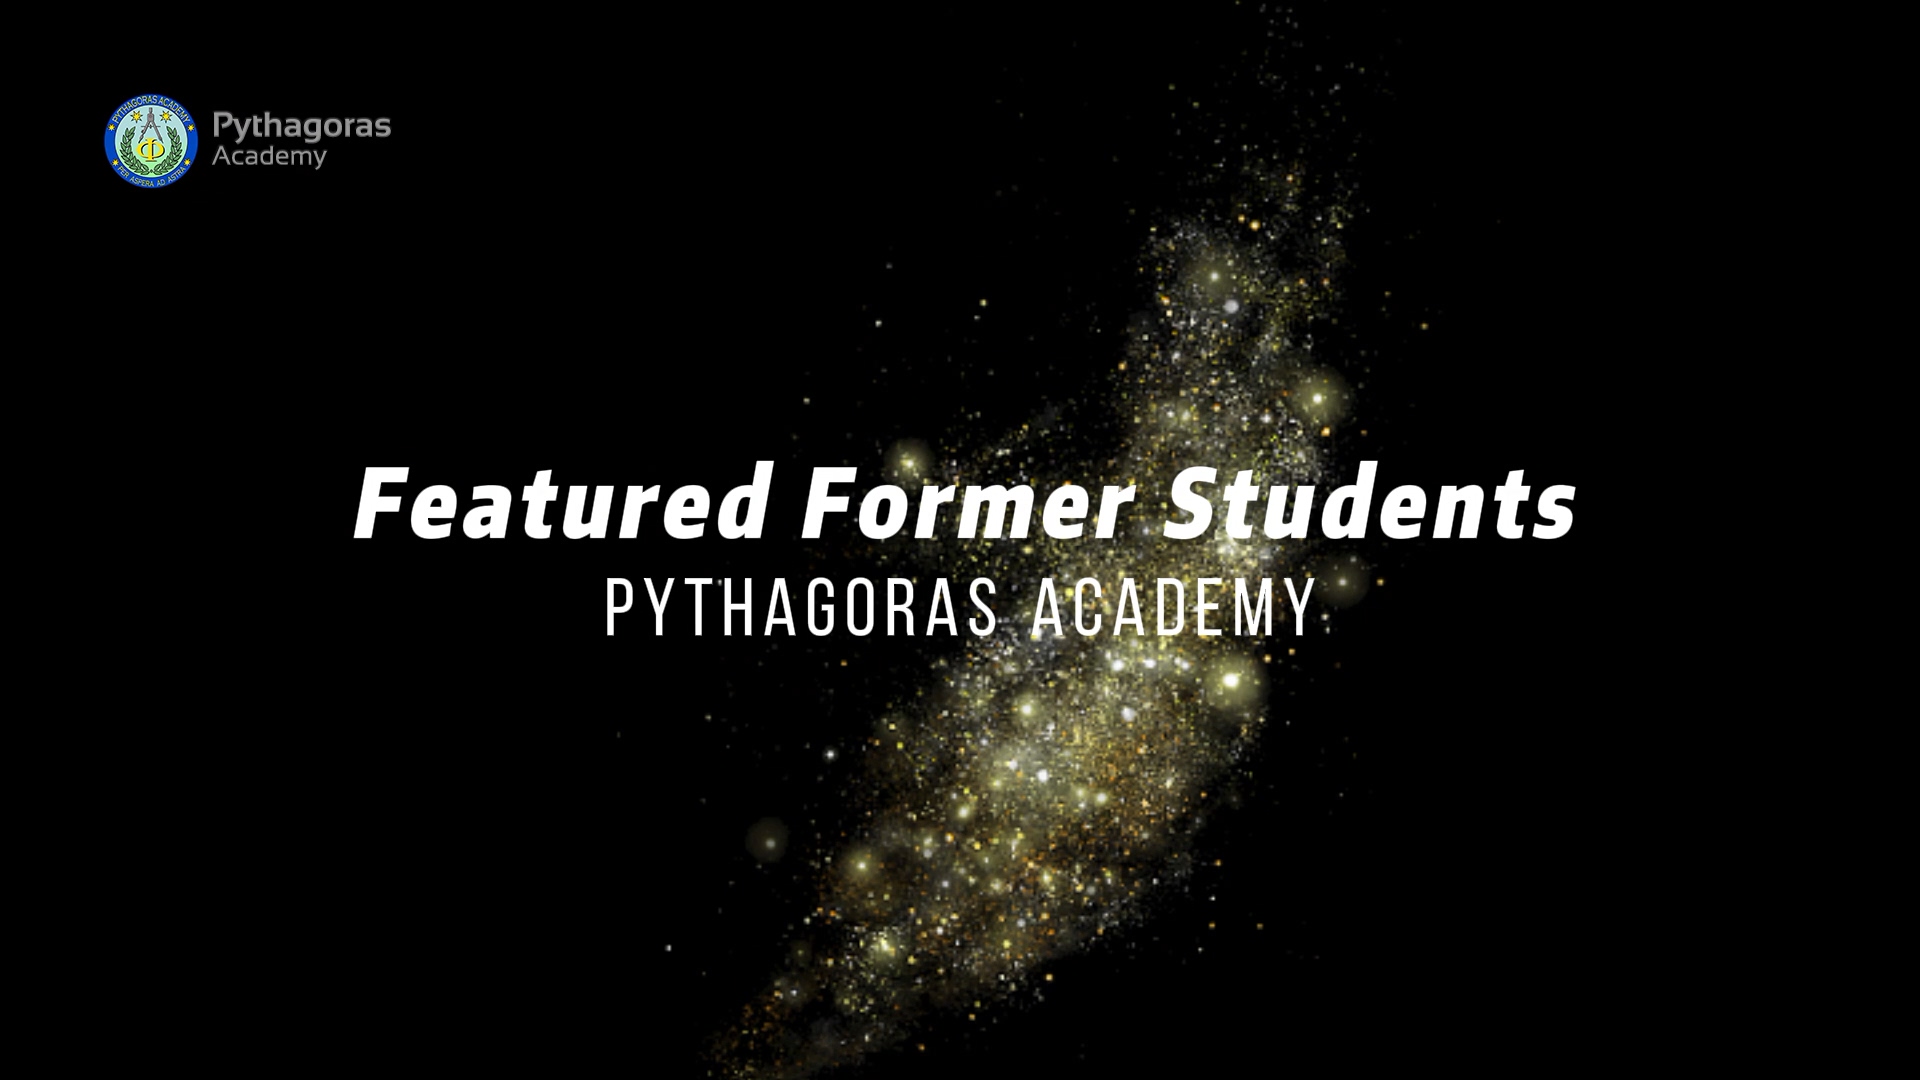 Featured Former Students of Pythagoras Academy